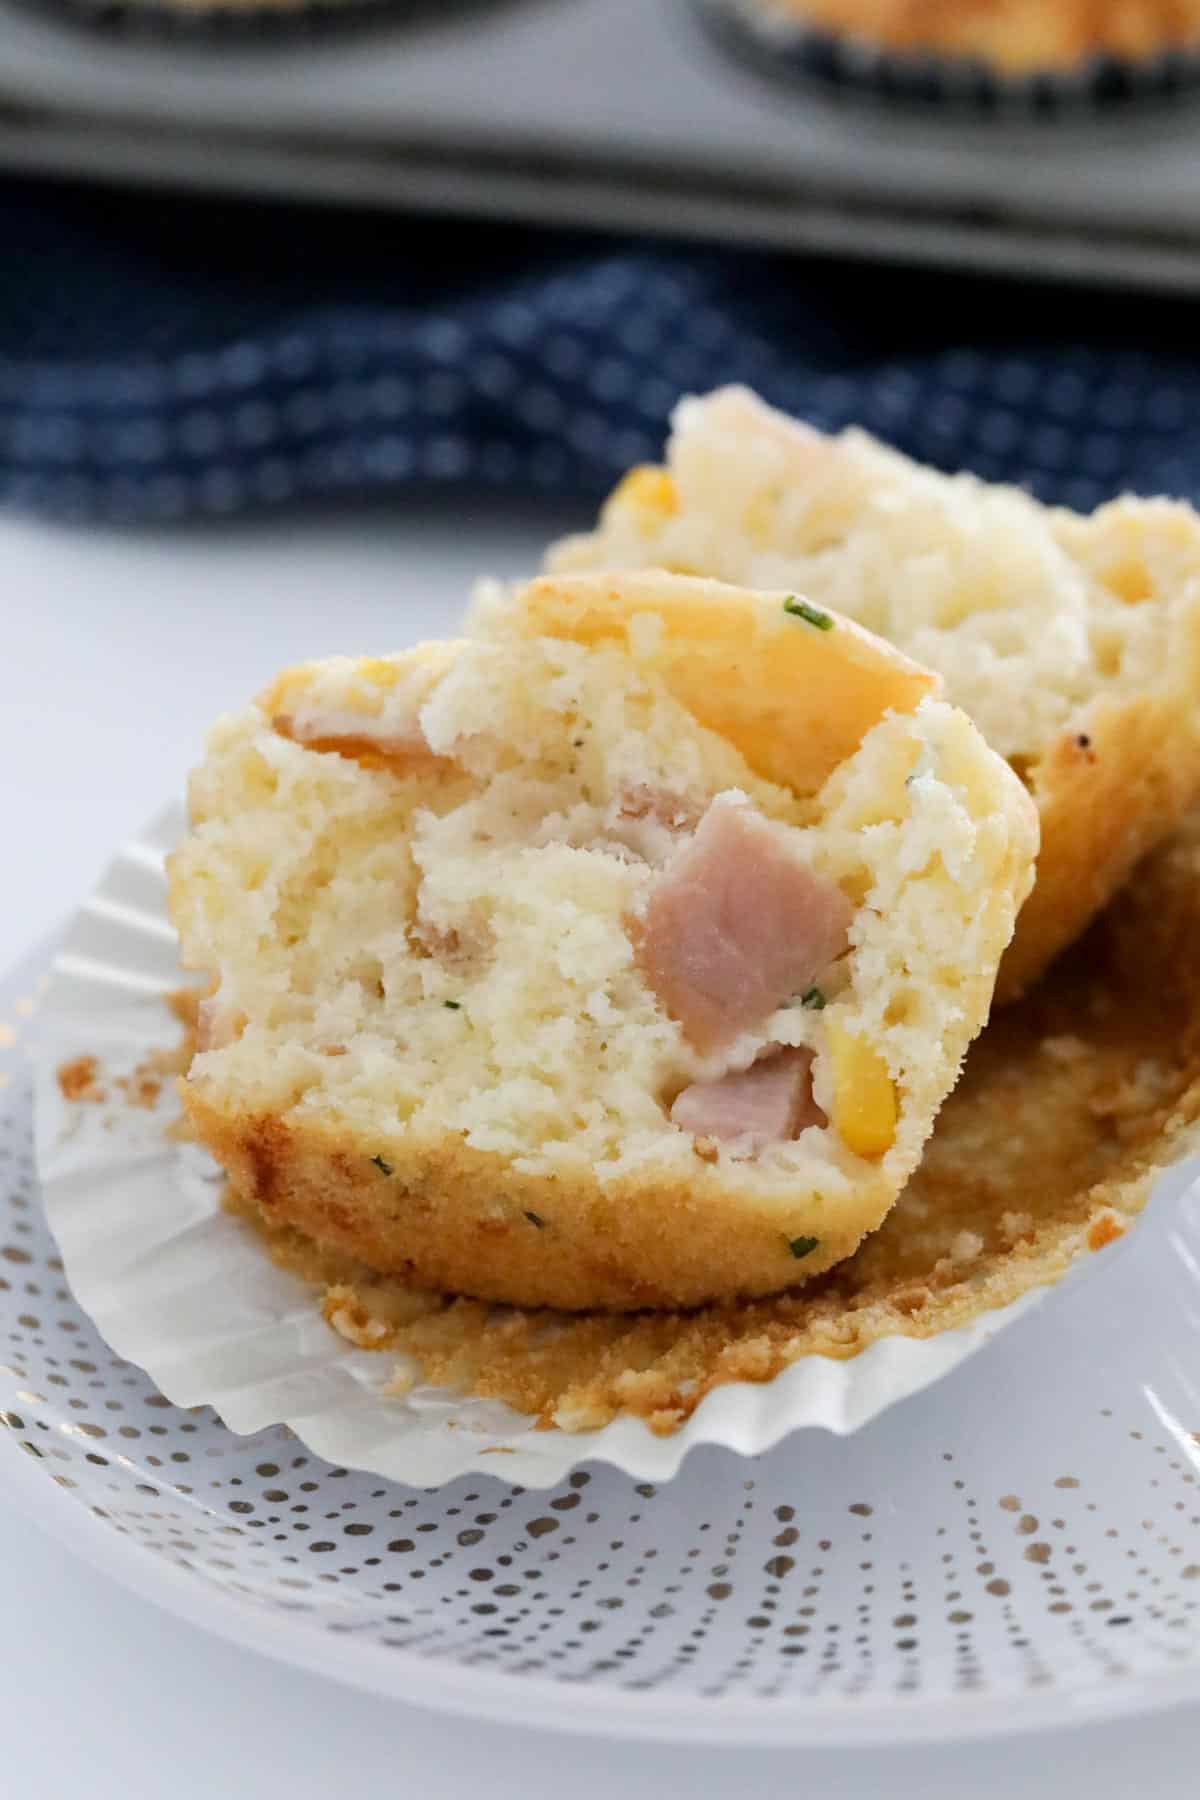 A muffin split open revealing pieces of ham and corn.